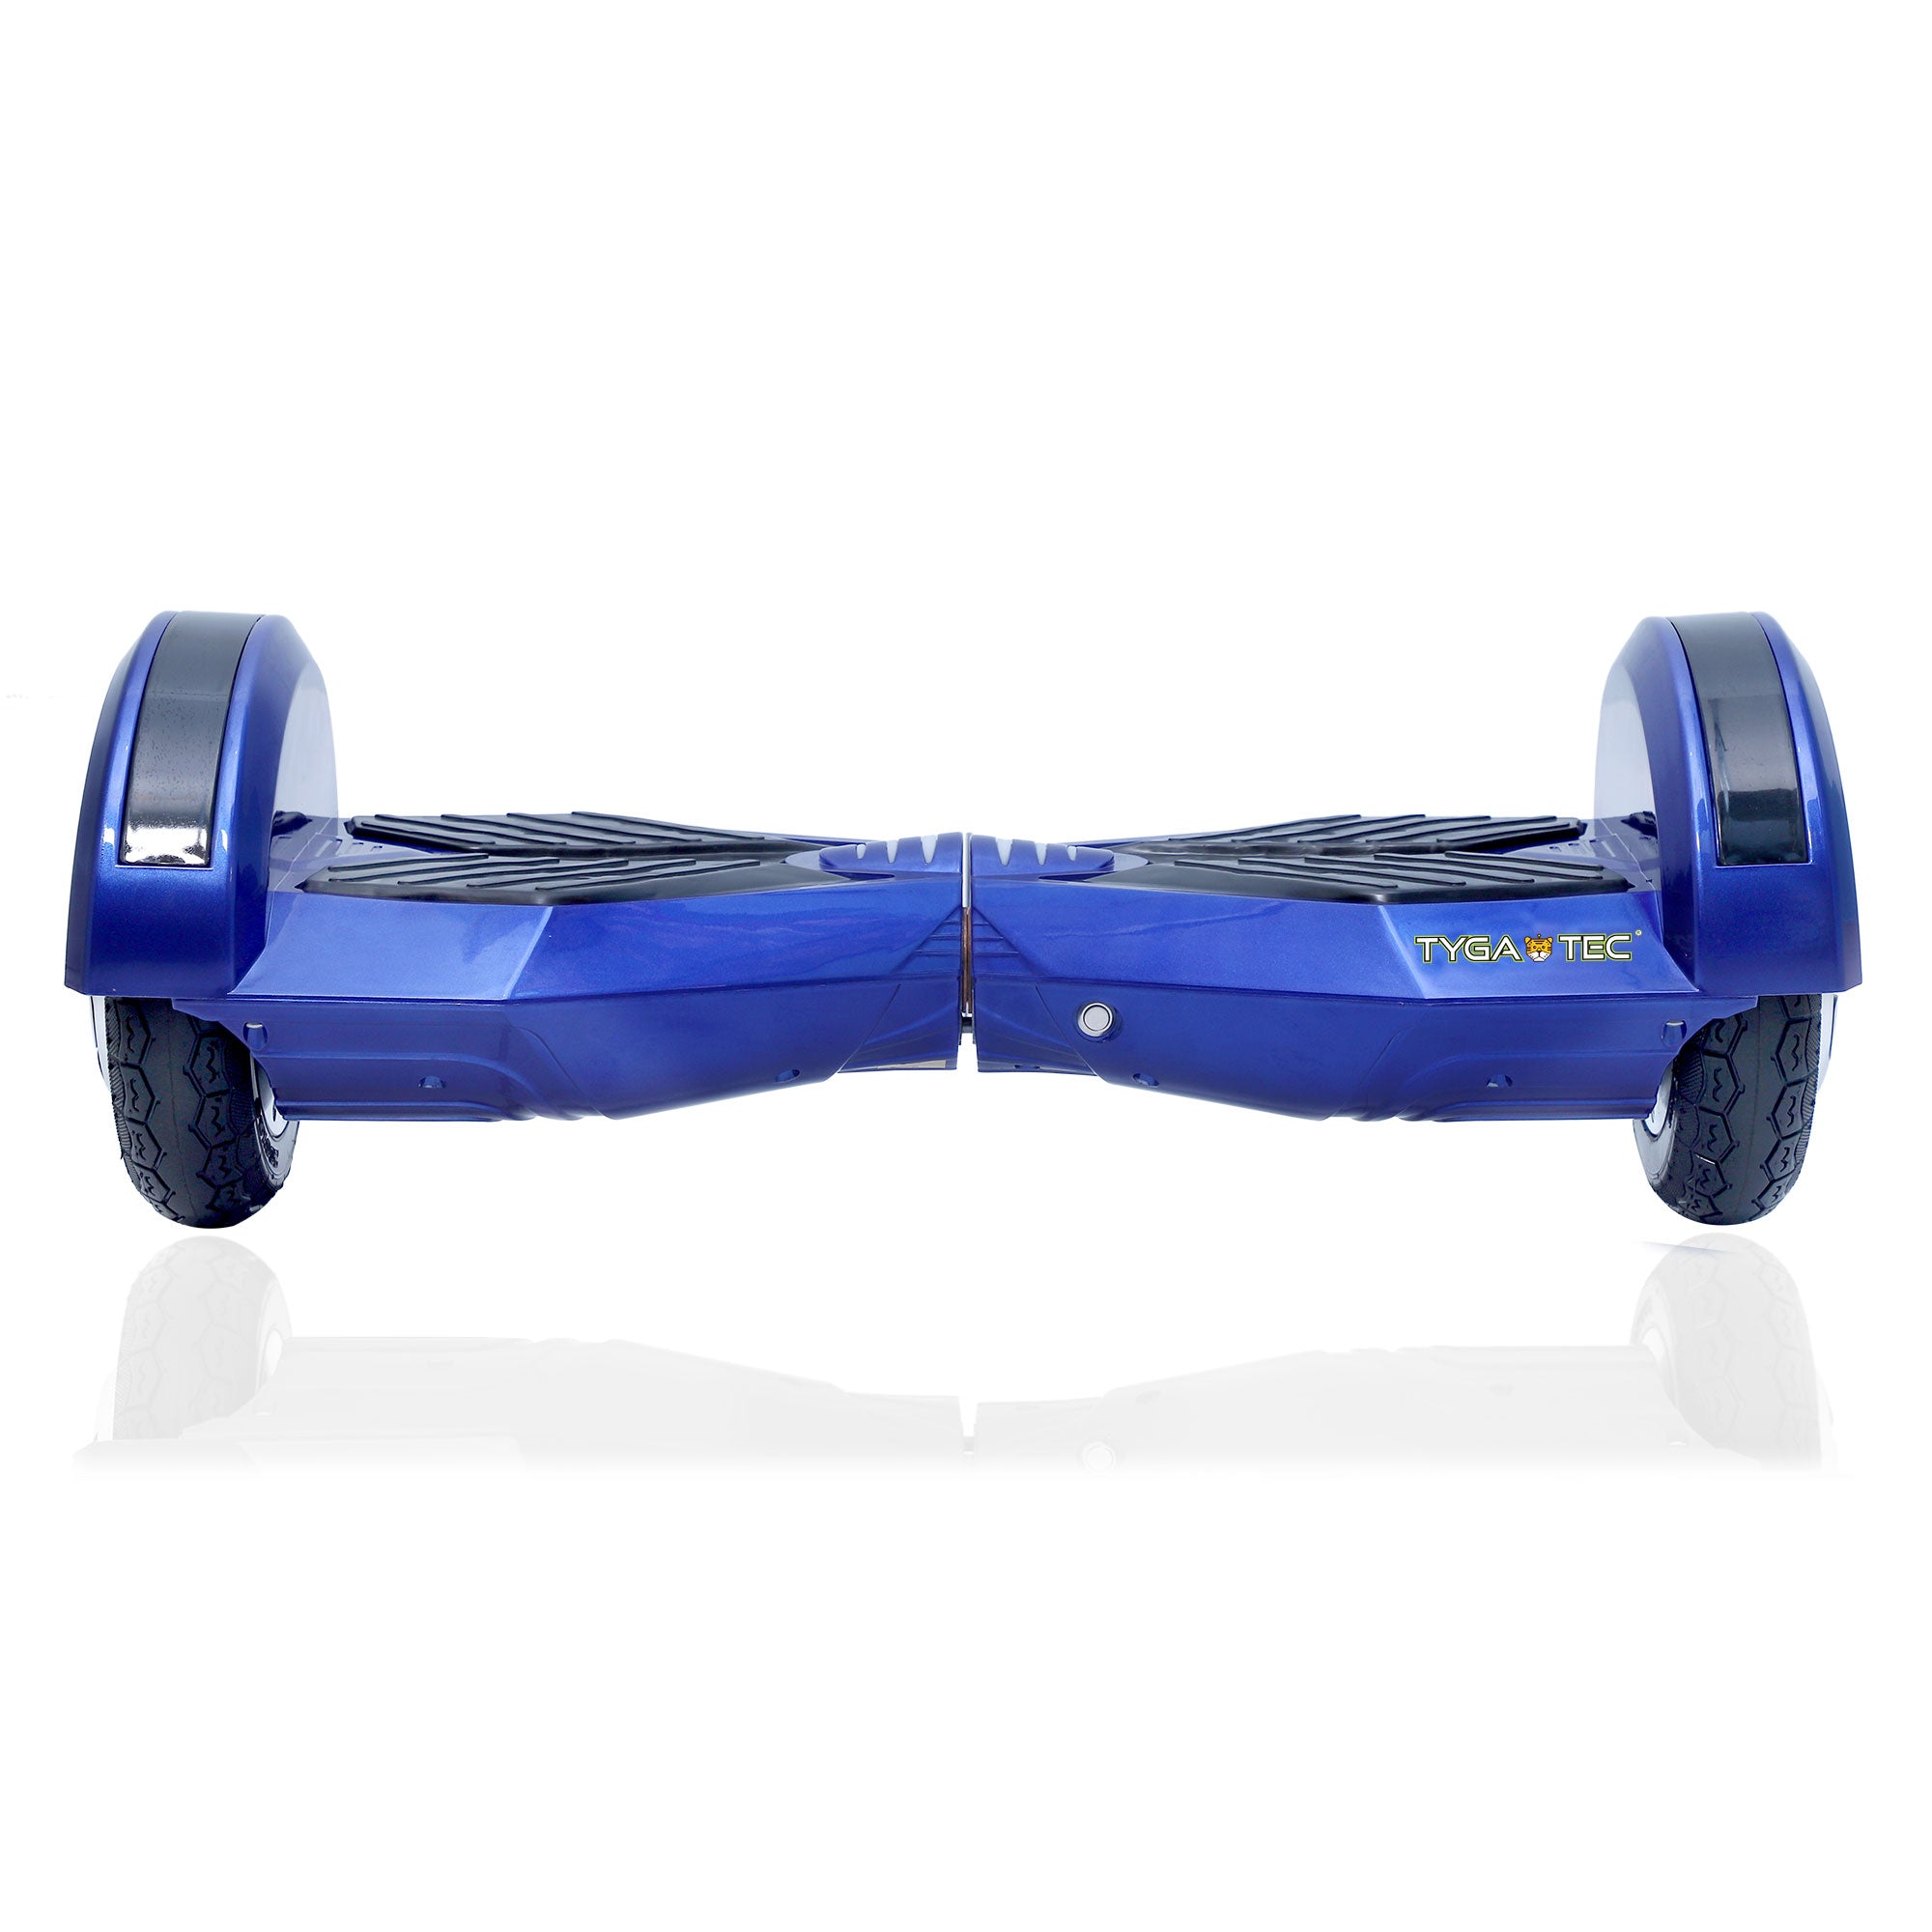 TYGATEC T5 - Powered Up Auto Balancing Hoverboard (Color Blue)